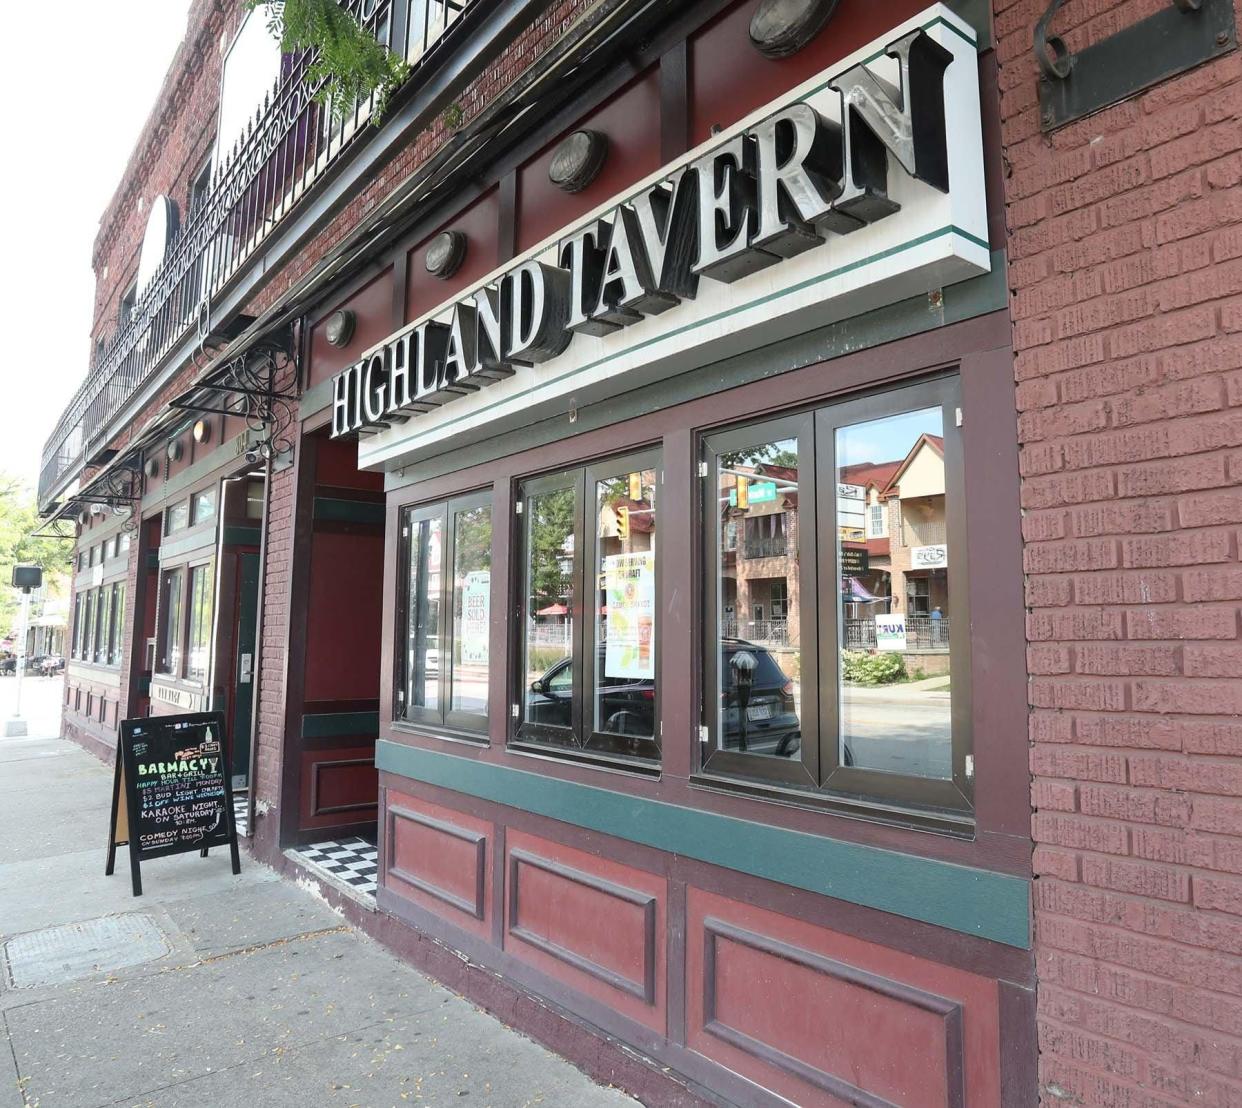 The Highland Tavern, shown in September 2020, has lost its appeal to the Ohio Supreme Court challenging now-expired pandemic health orders that led to the revocation of the bar's liquor permit.